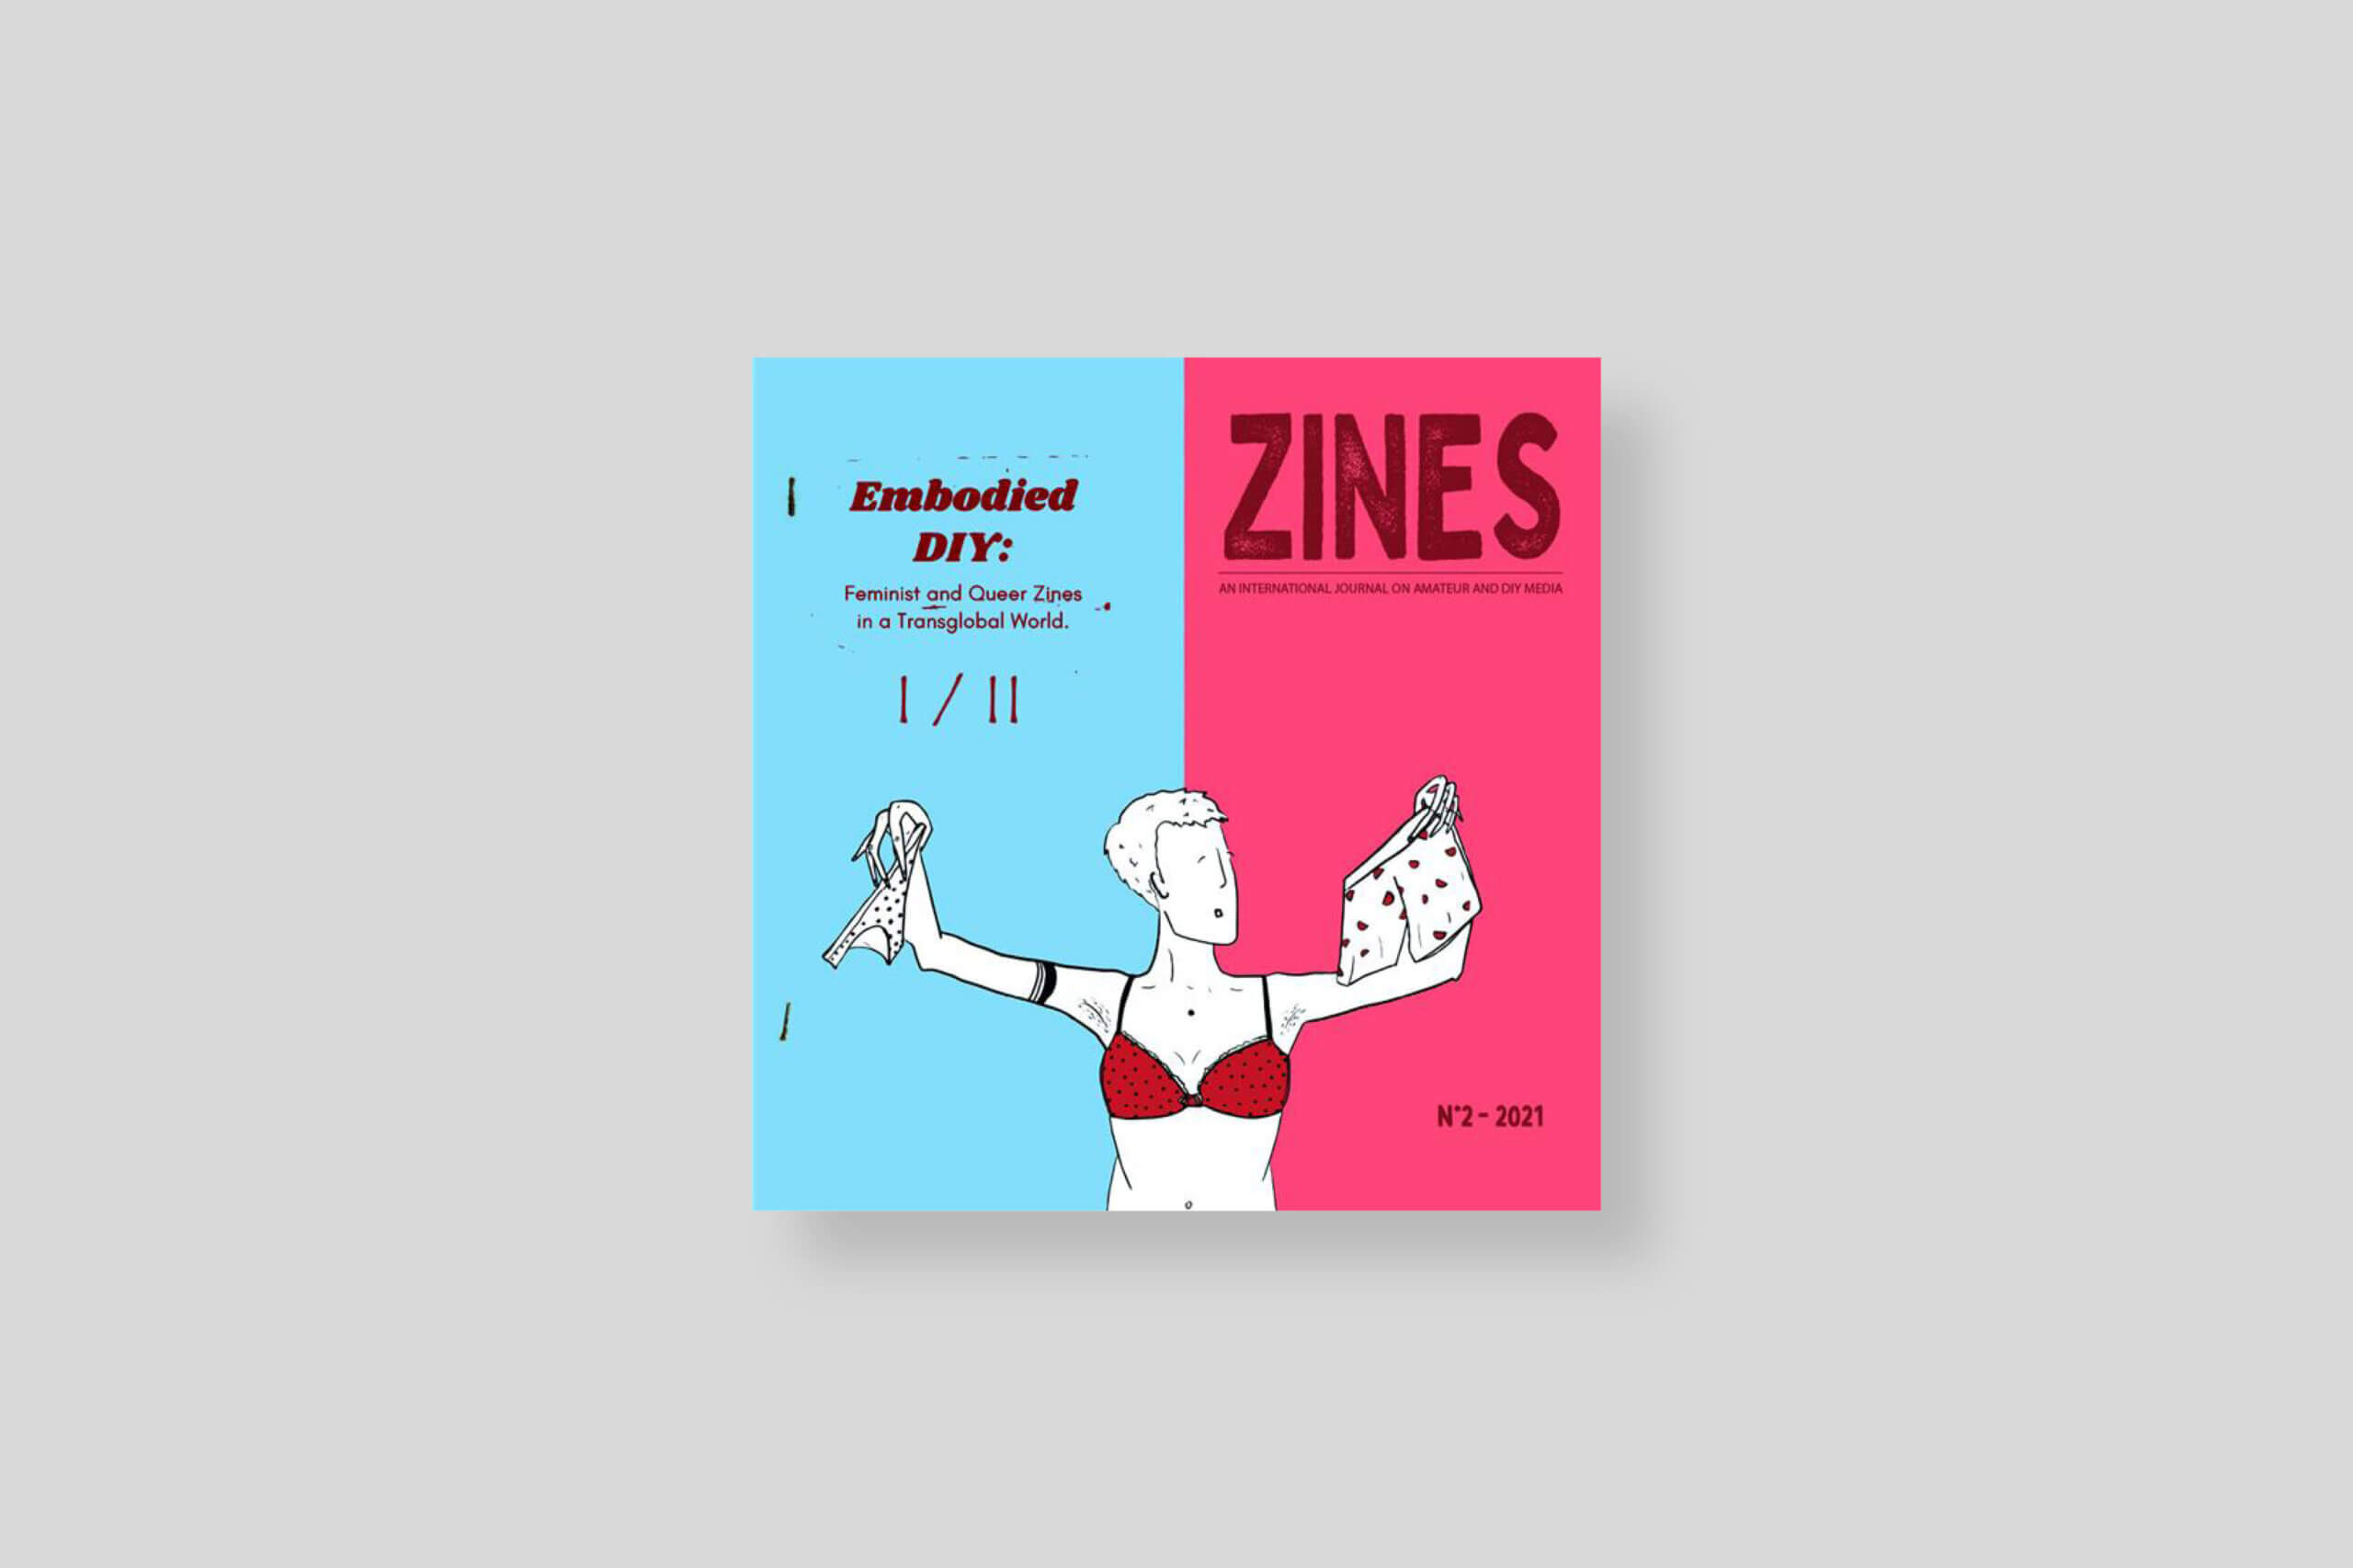 embodied-diy-feminist-and-queer-zines-ina-transglobal-world-part-1-cover